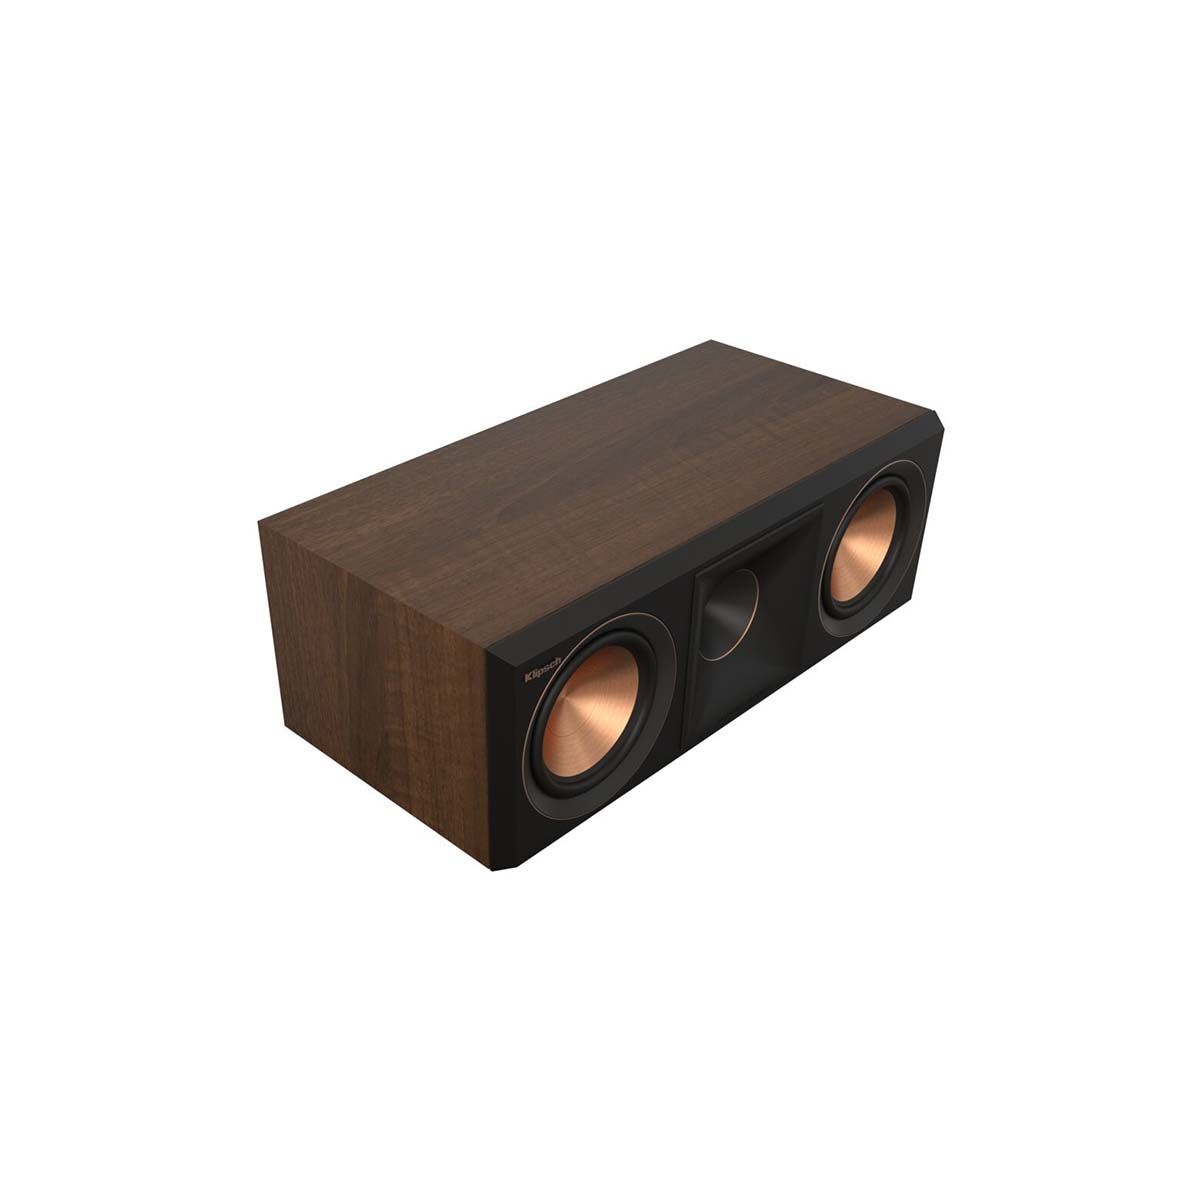 Klipsch RP-500C II Center Channel Speaker - Walnut - angled front view without grill